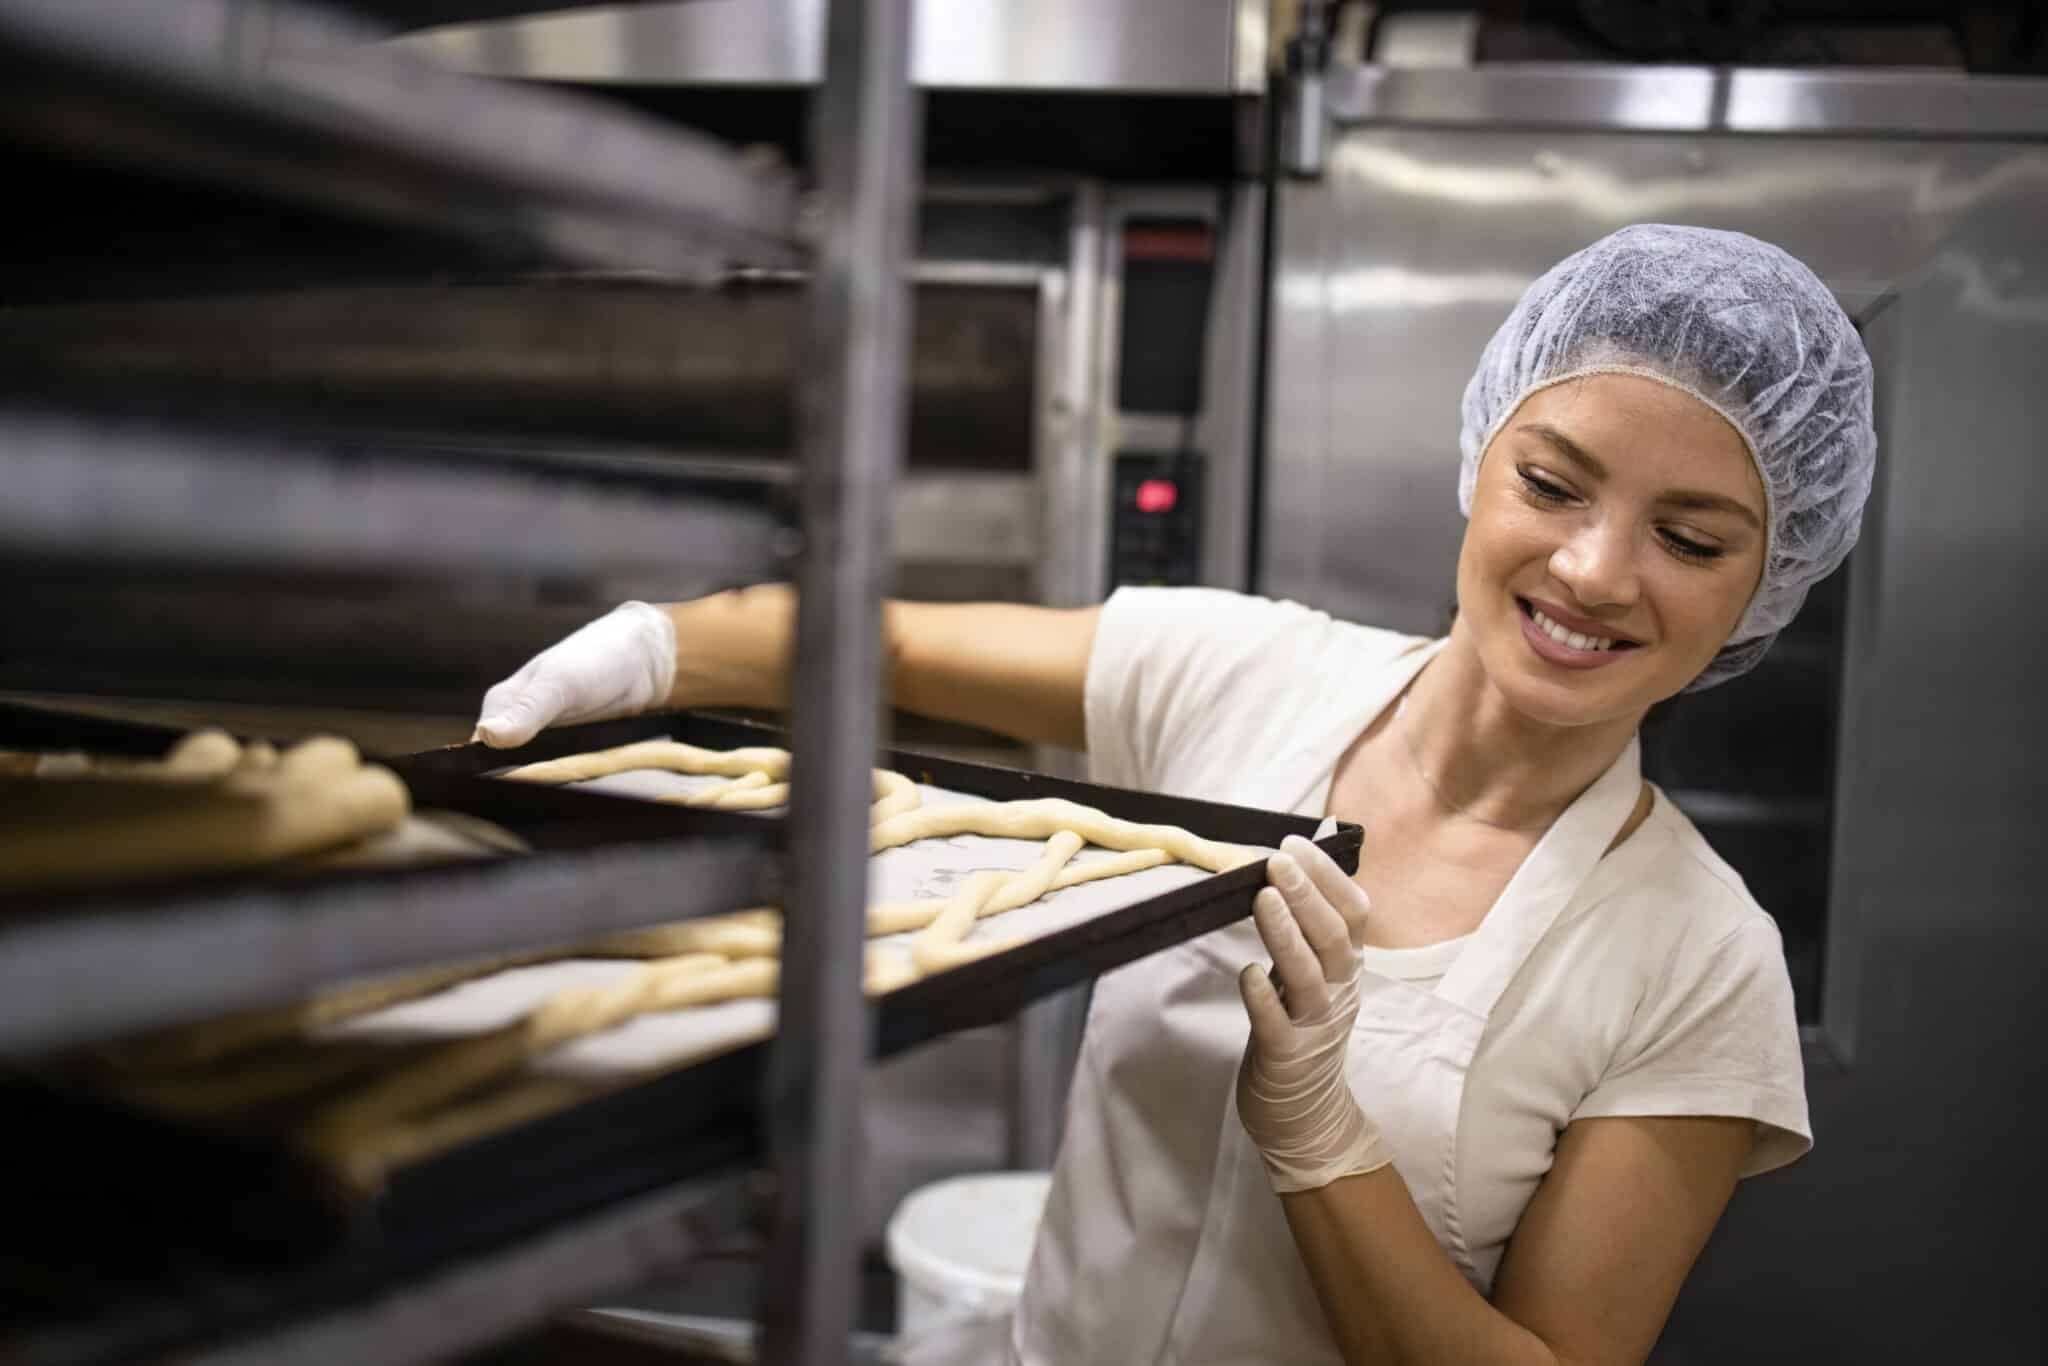 Best Hairnets for Cooking